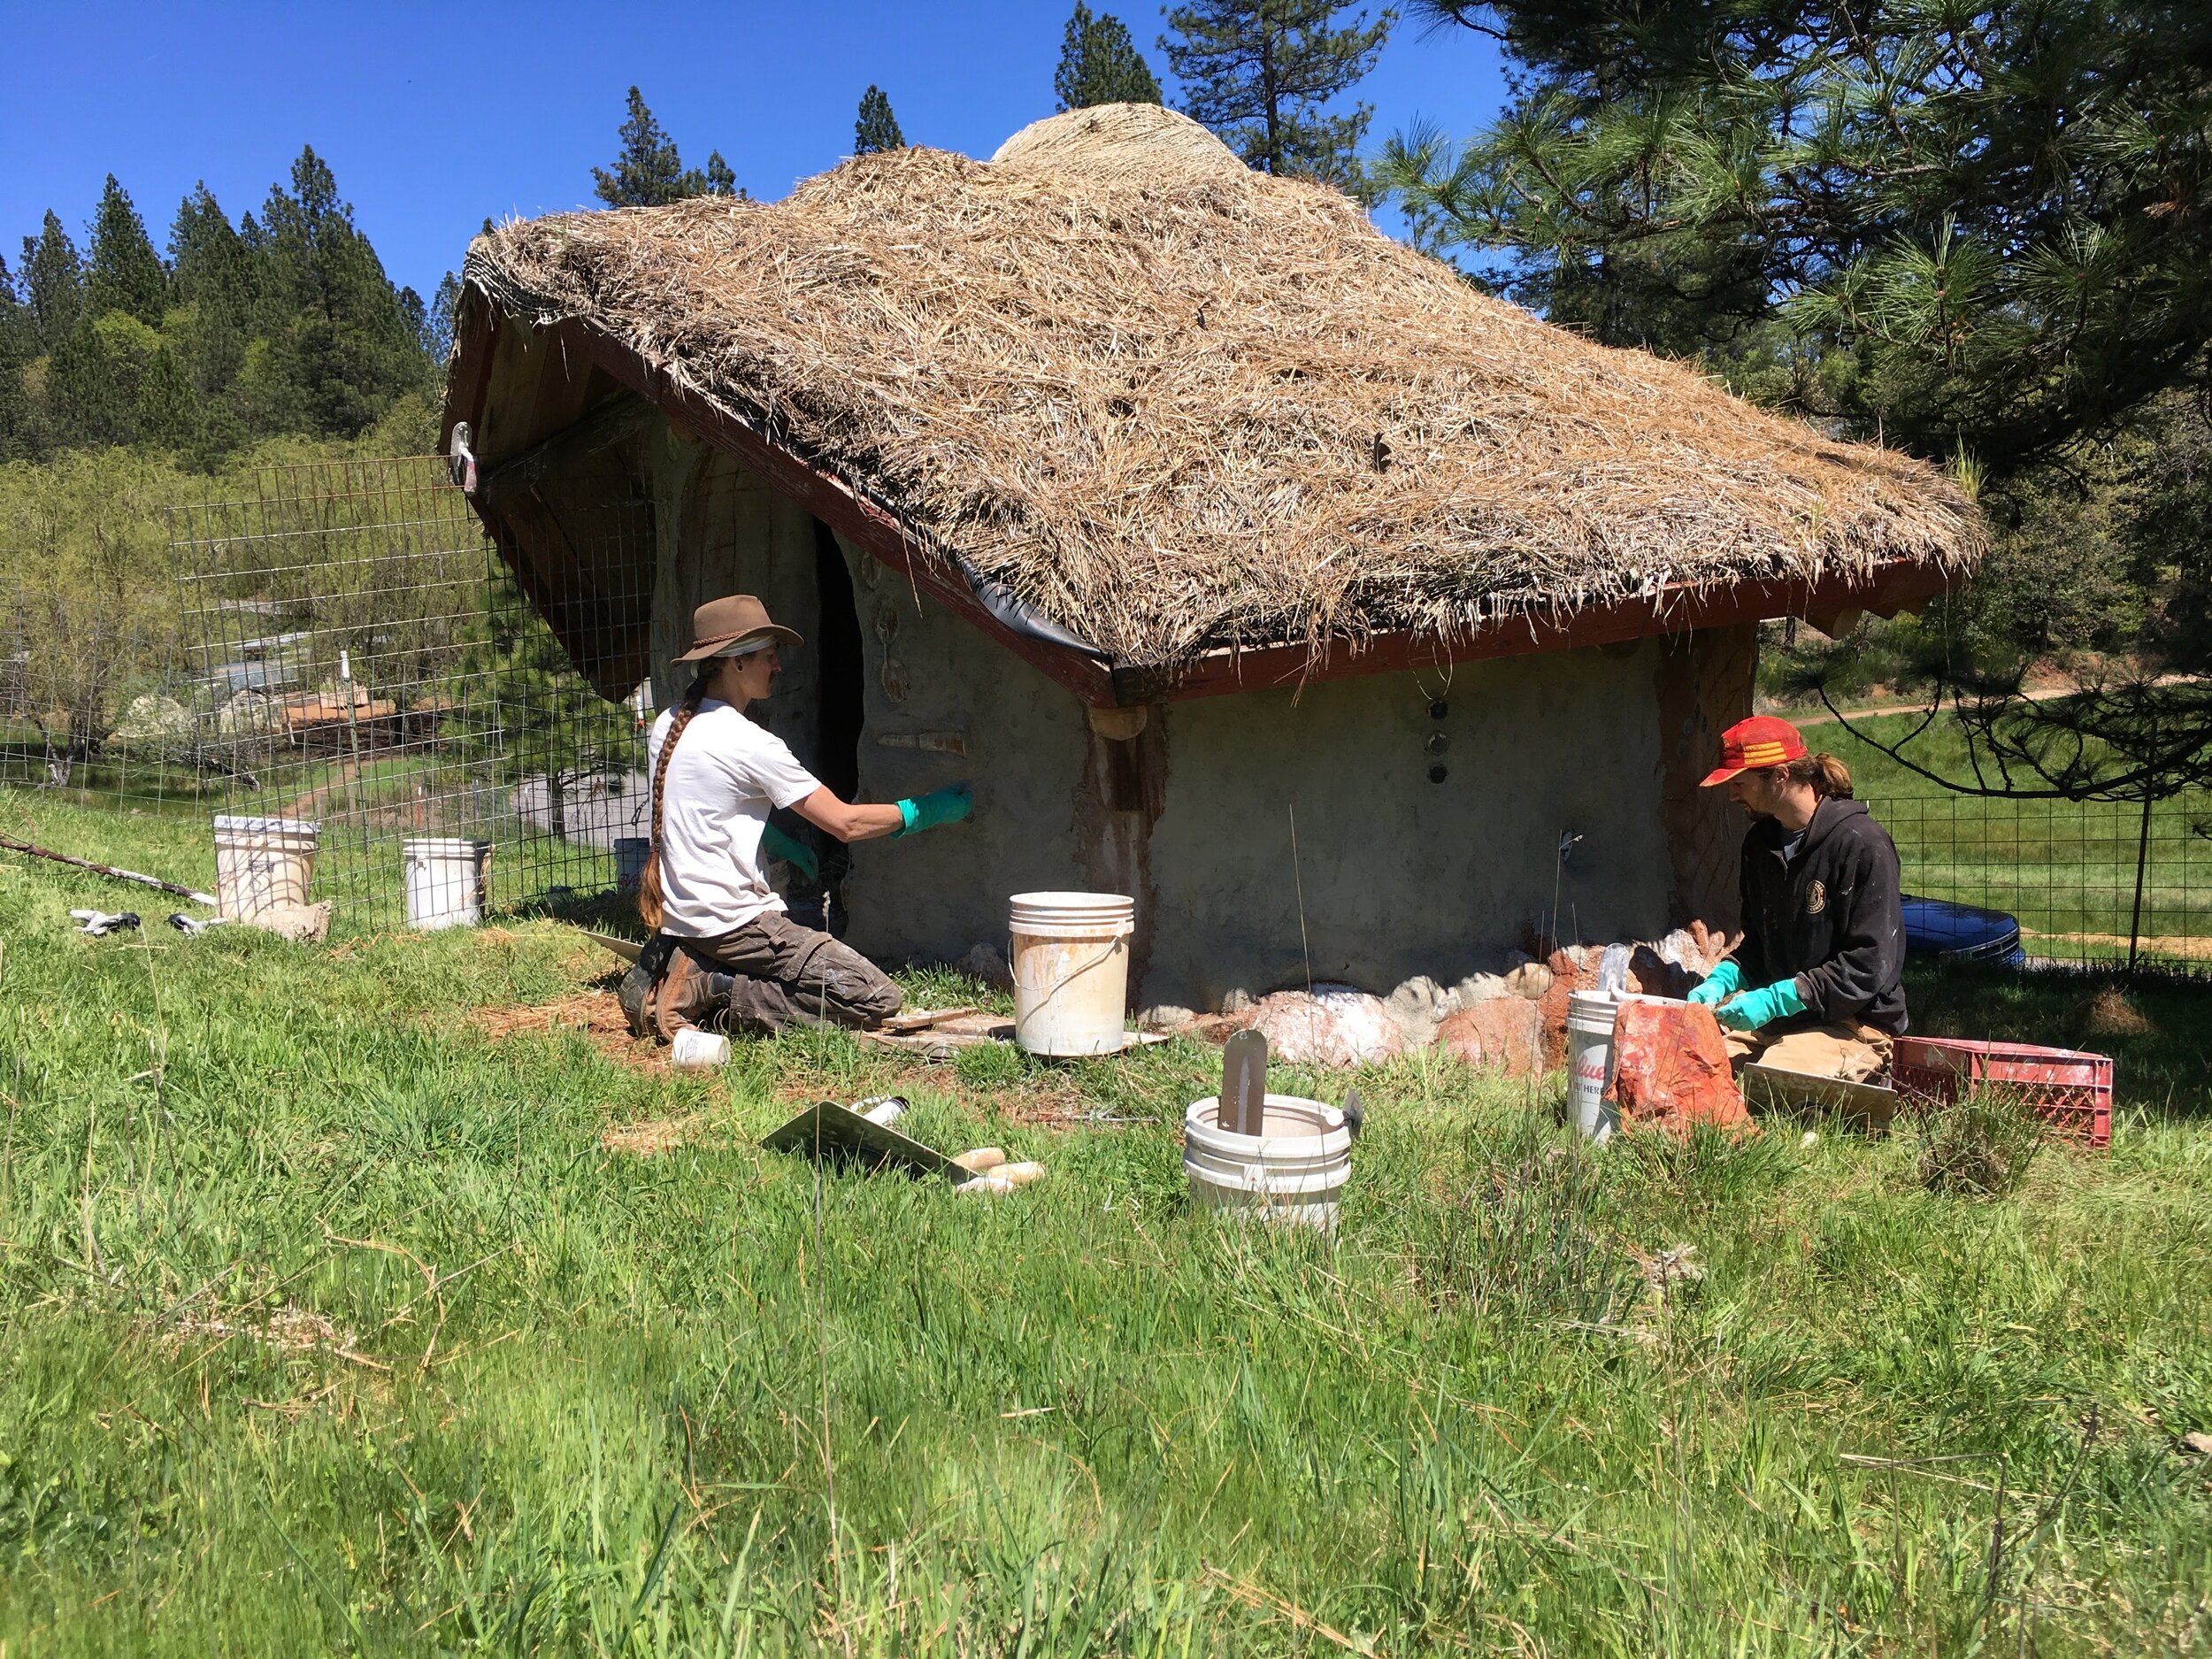 Ashley McDonell is lead facilitator in charge of Natural Building on our upcoming course Foundations of Regenerative Design in Tzununa, Lake Atitlan, Guatemala 2020